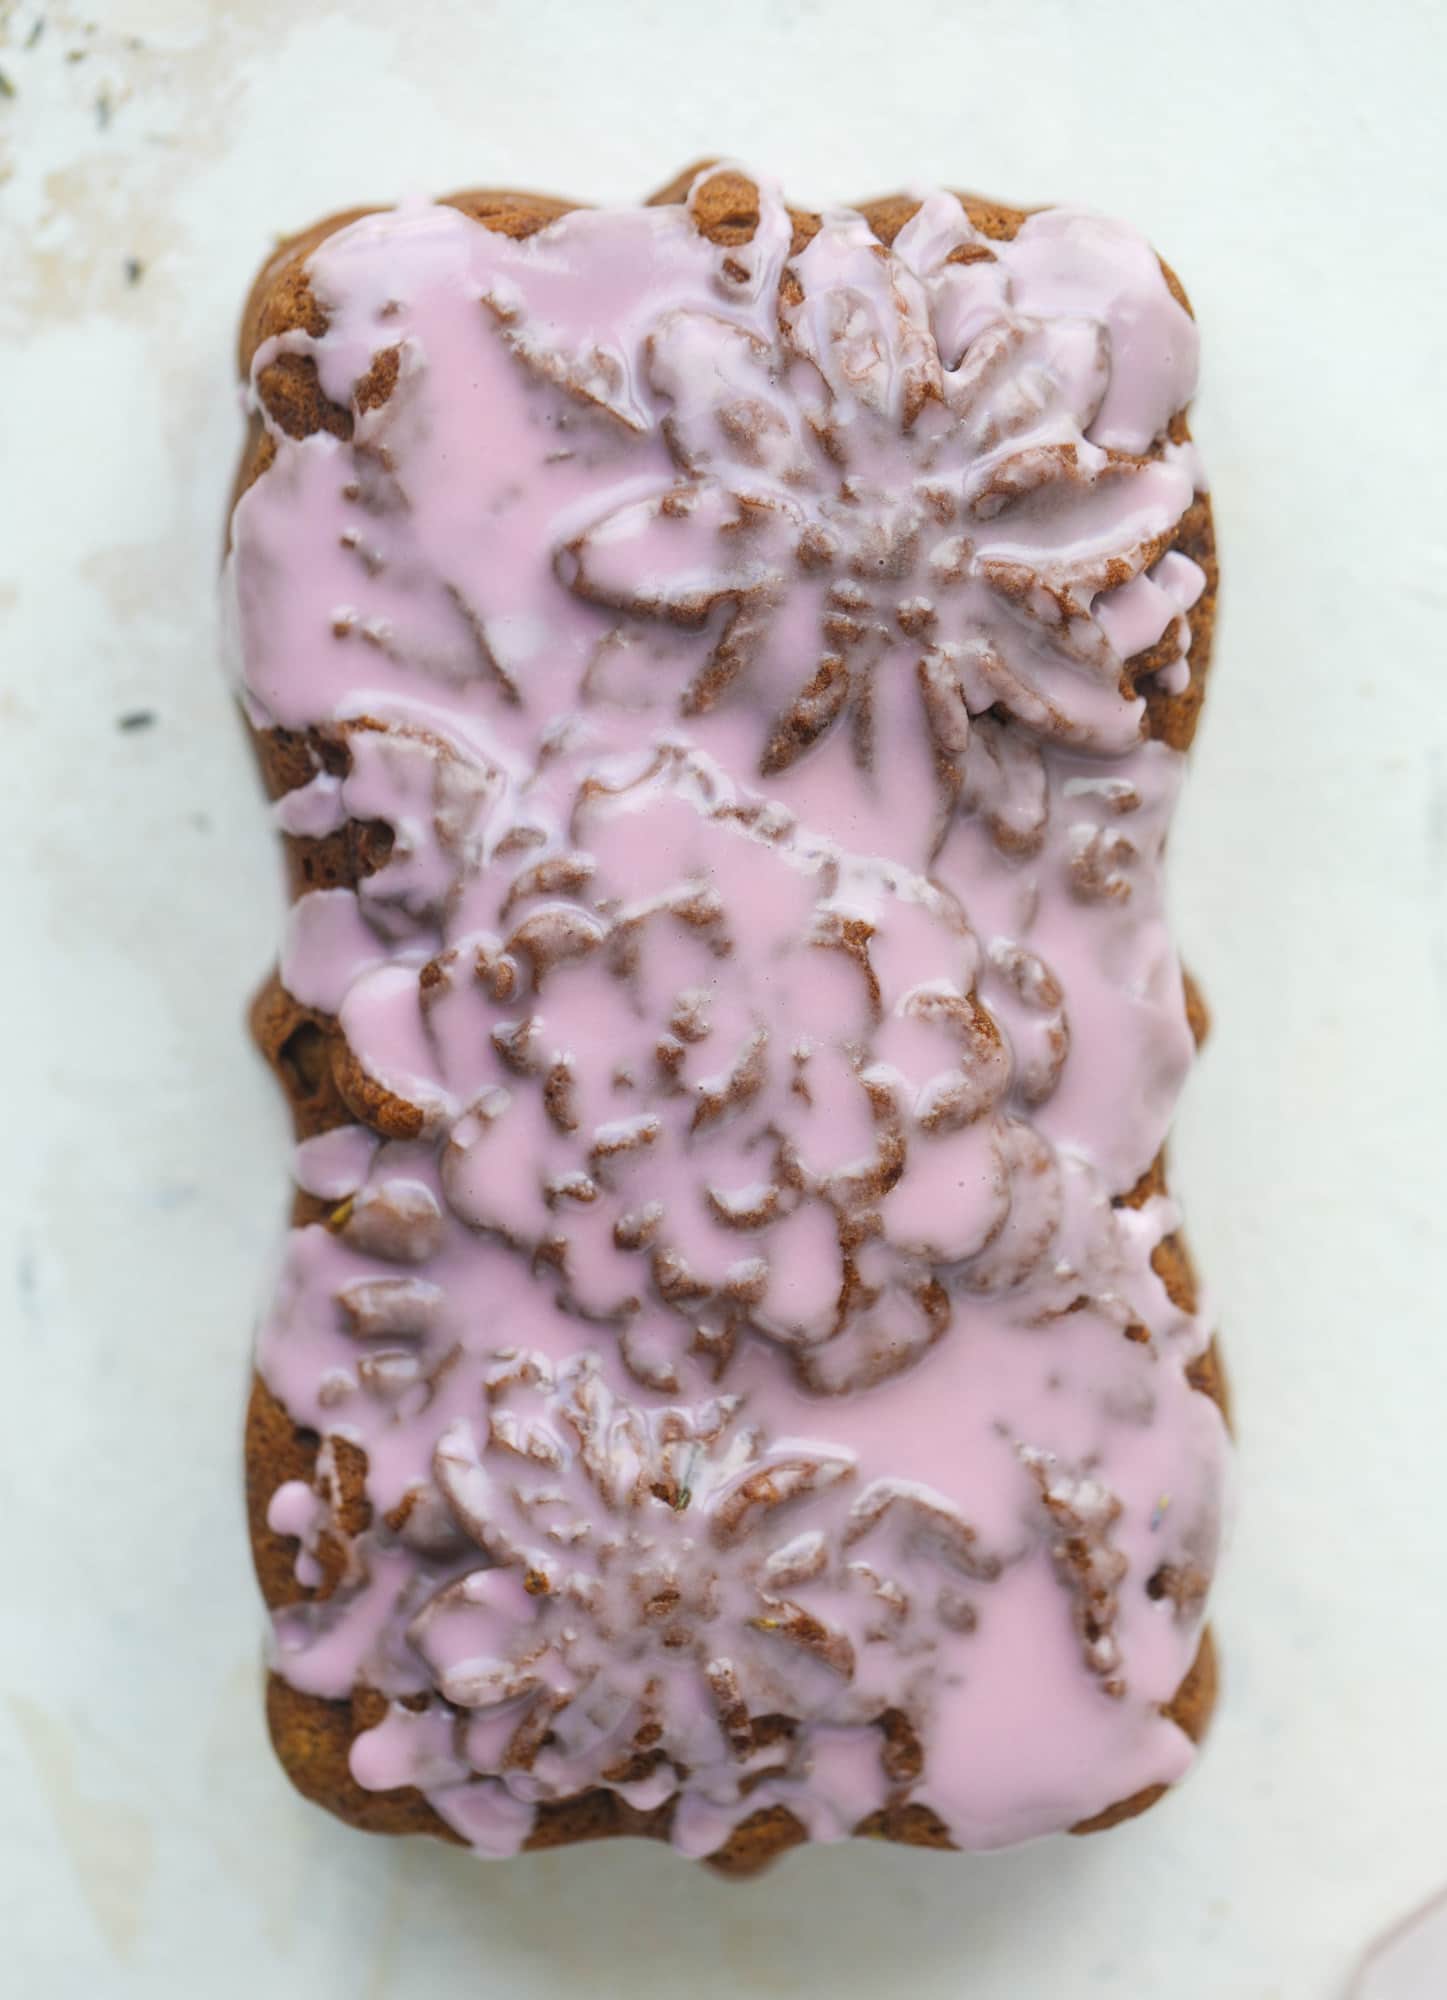 This lavender banana bread is a fresh, modern spring spin on the classic! The light flavor of lavender gives this banana bread a whimsical twist. I howsweeteats.com #lavender #bananabread